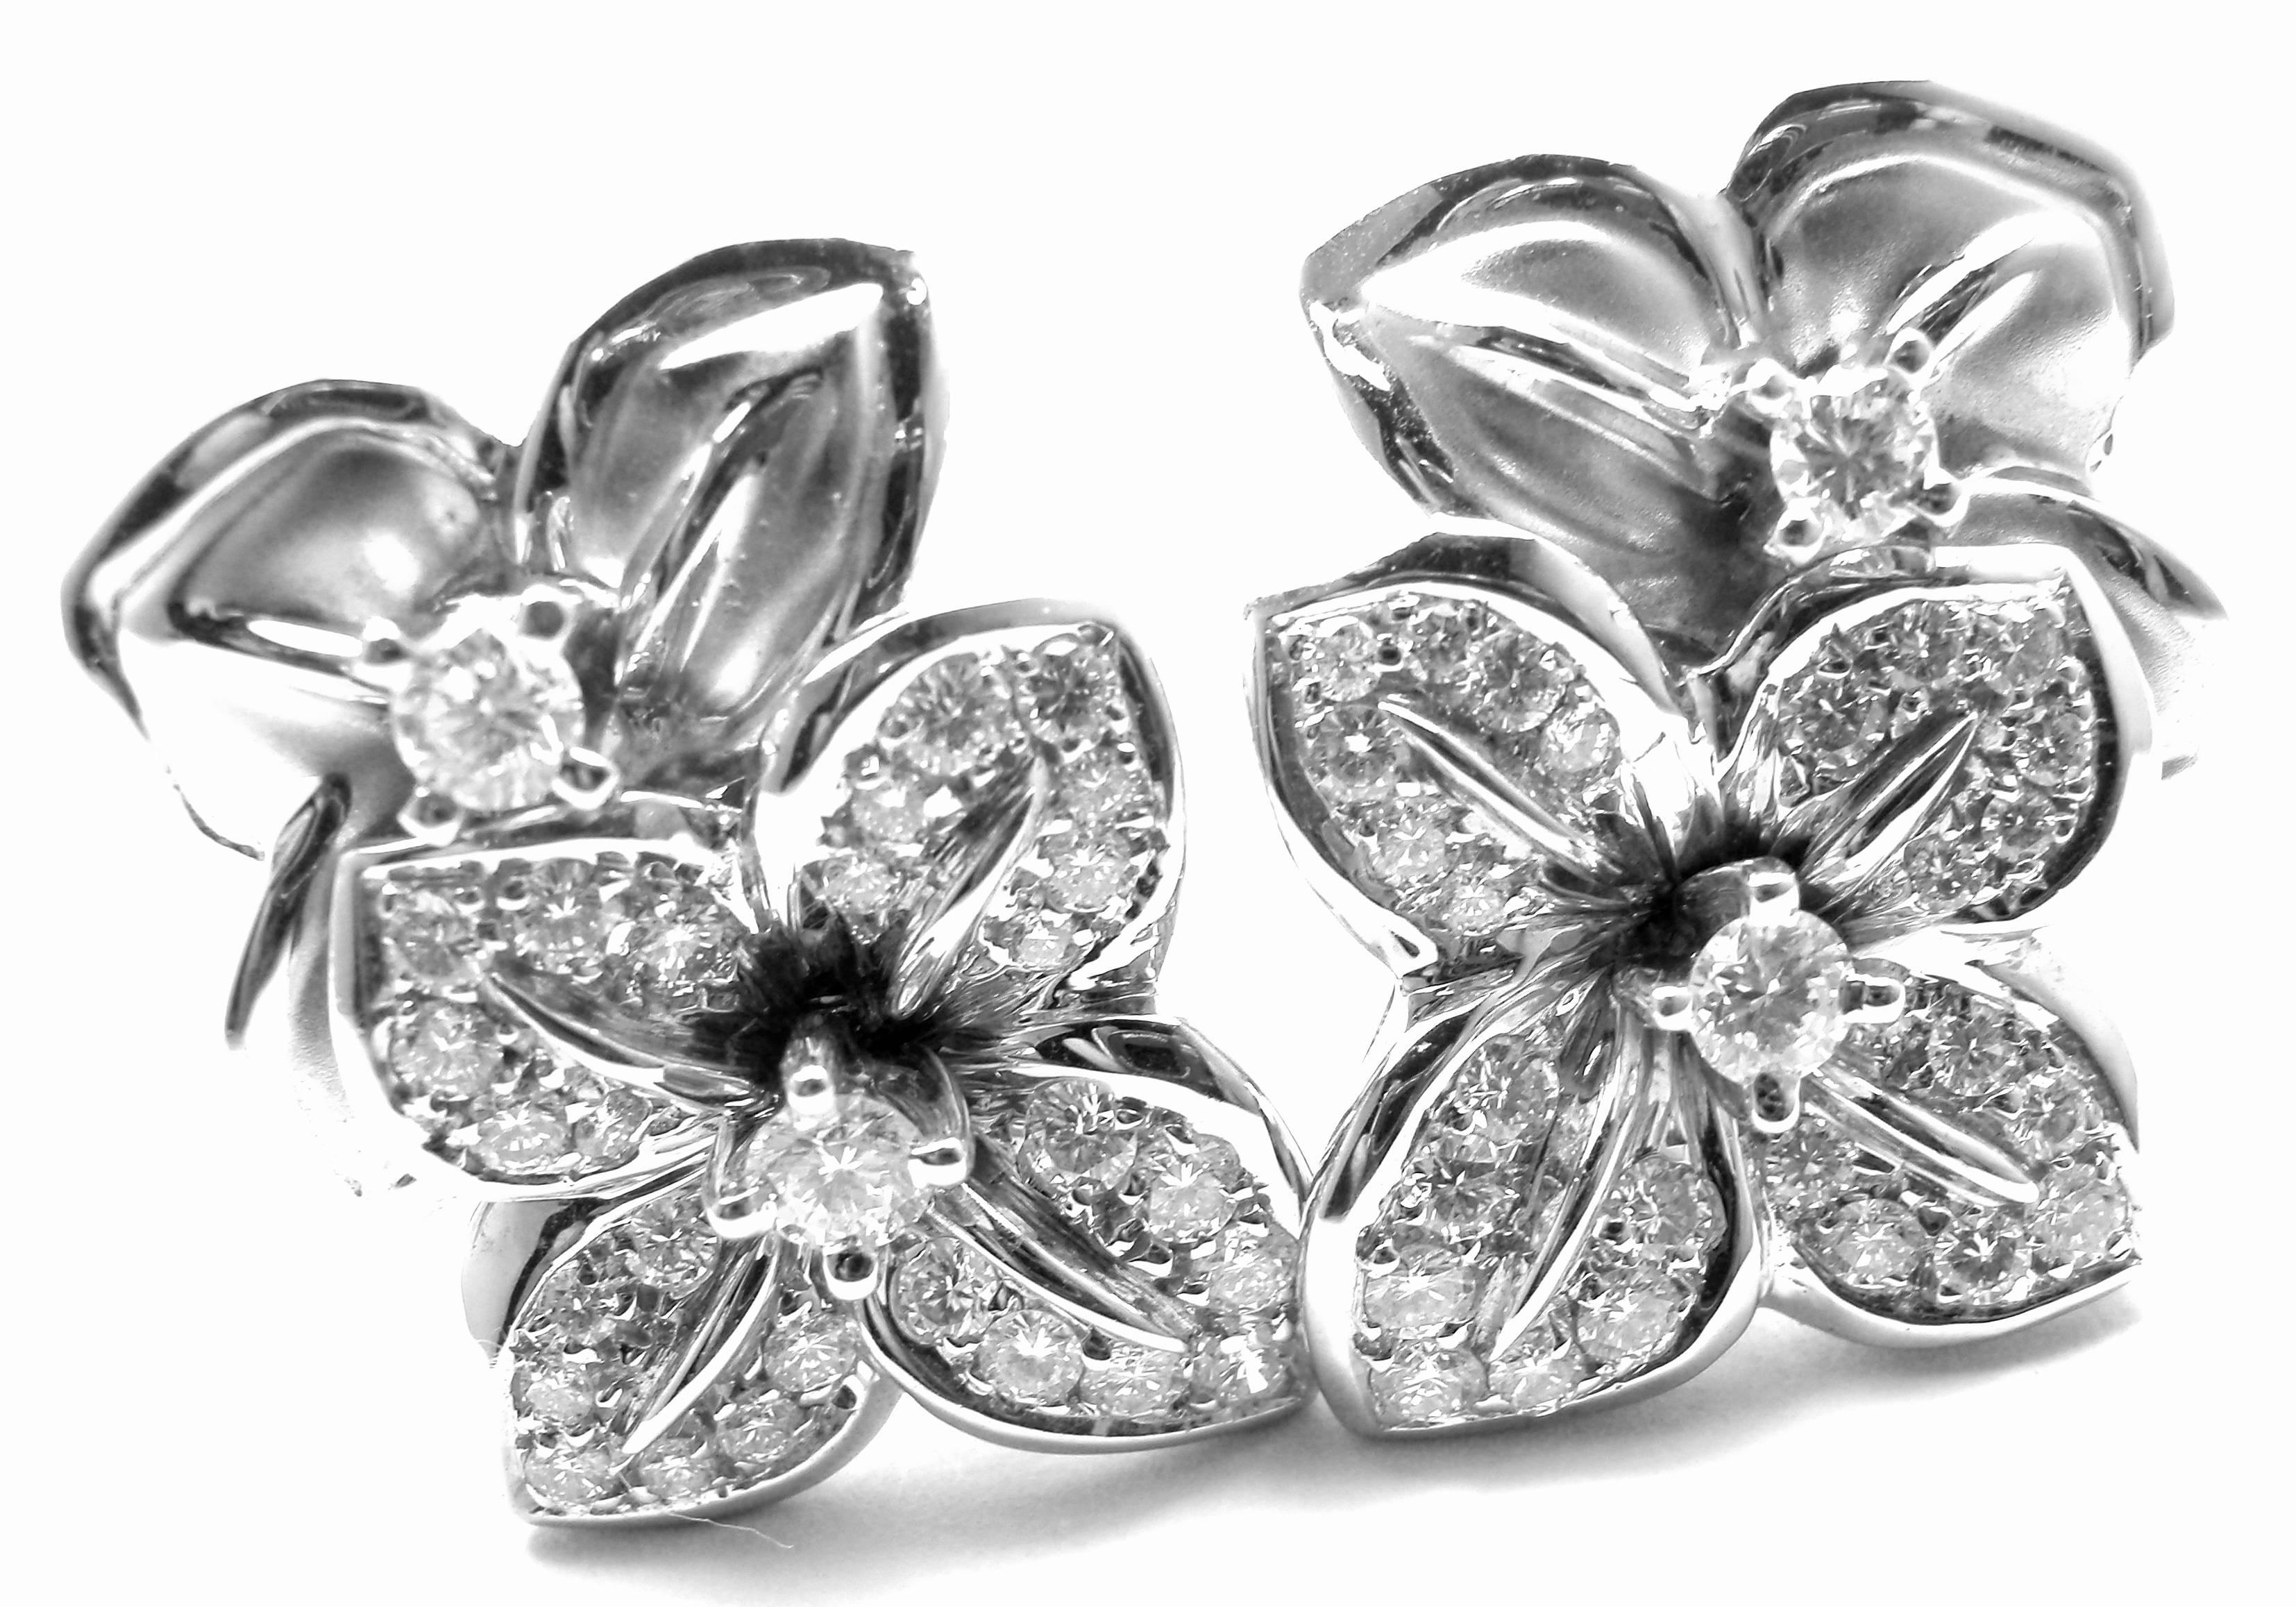 18k White Gold Diamond Flower by Mikimoto. 
With 58 round brilliant cut diamonds VVS1 clarity, E color total weight approx. 1.5ct
These earrings come with Mikimoto box.
***These earrings are for pierced ears.

Details: 
Measurements: 1